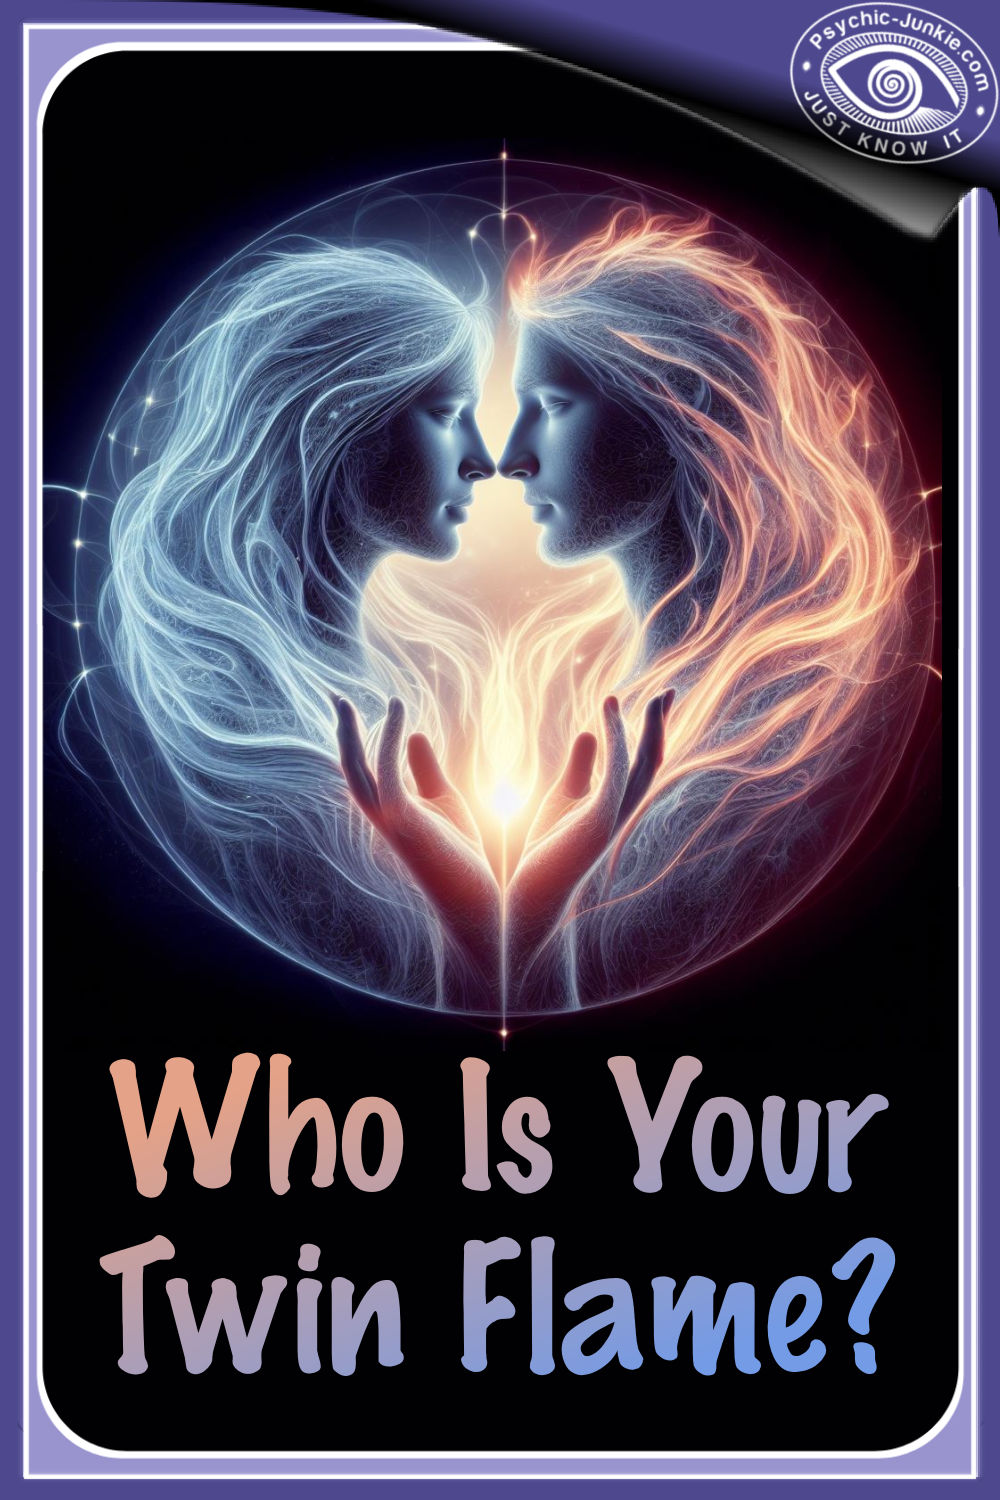 What Is Your Twin Flame?